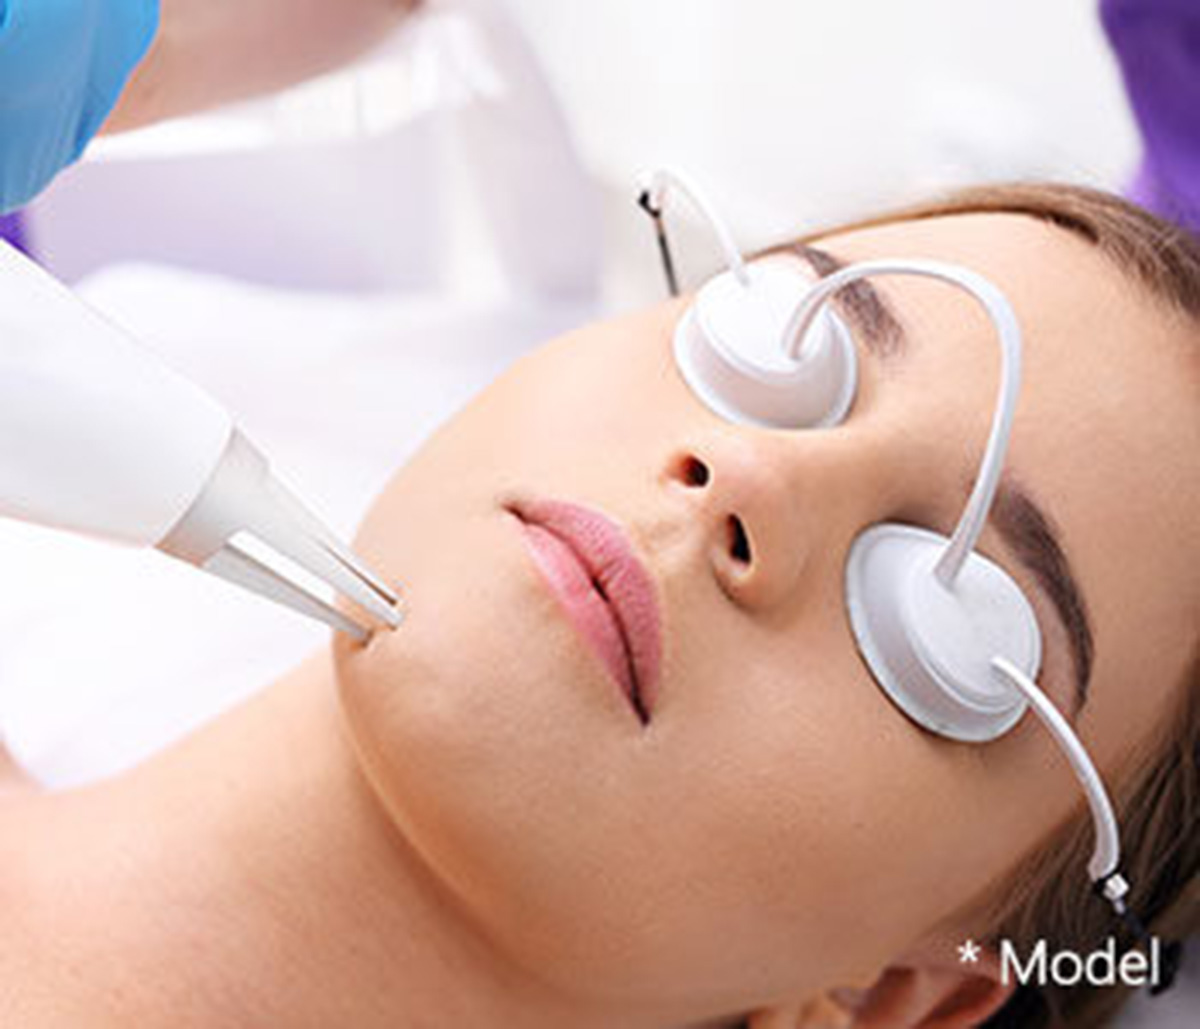 Patients enjoy treatment for wrinkles with PicoSure laser facials near Beverly Hills